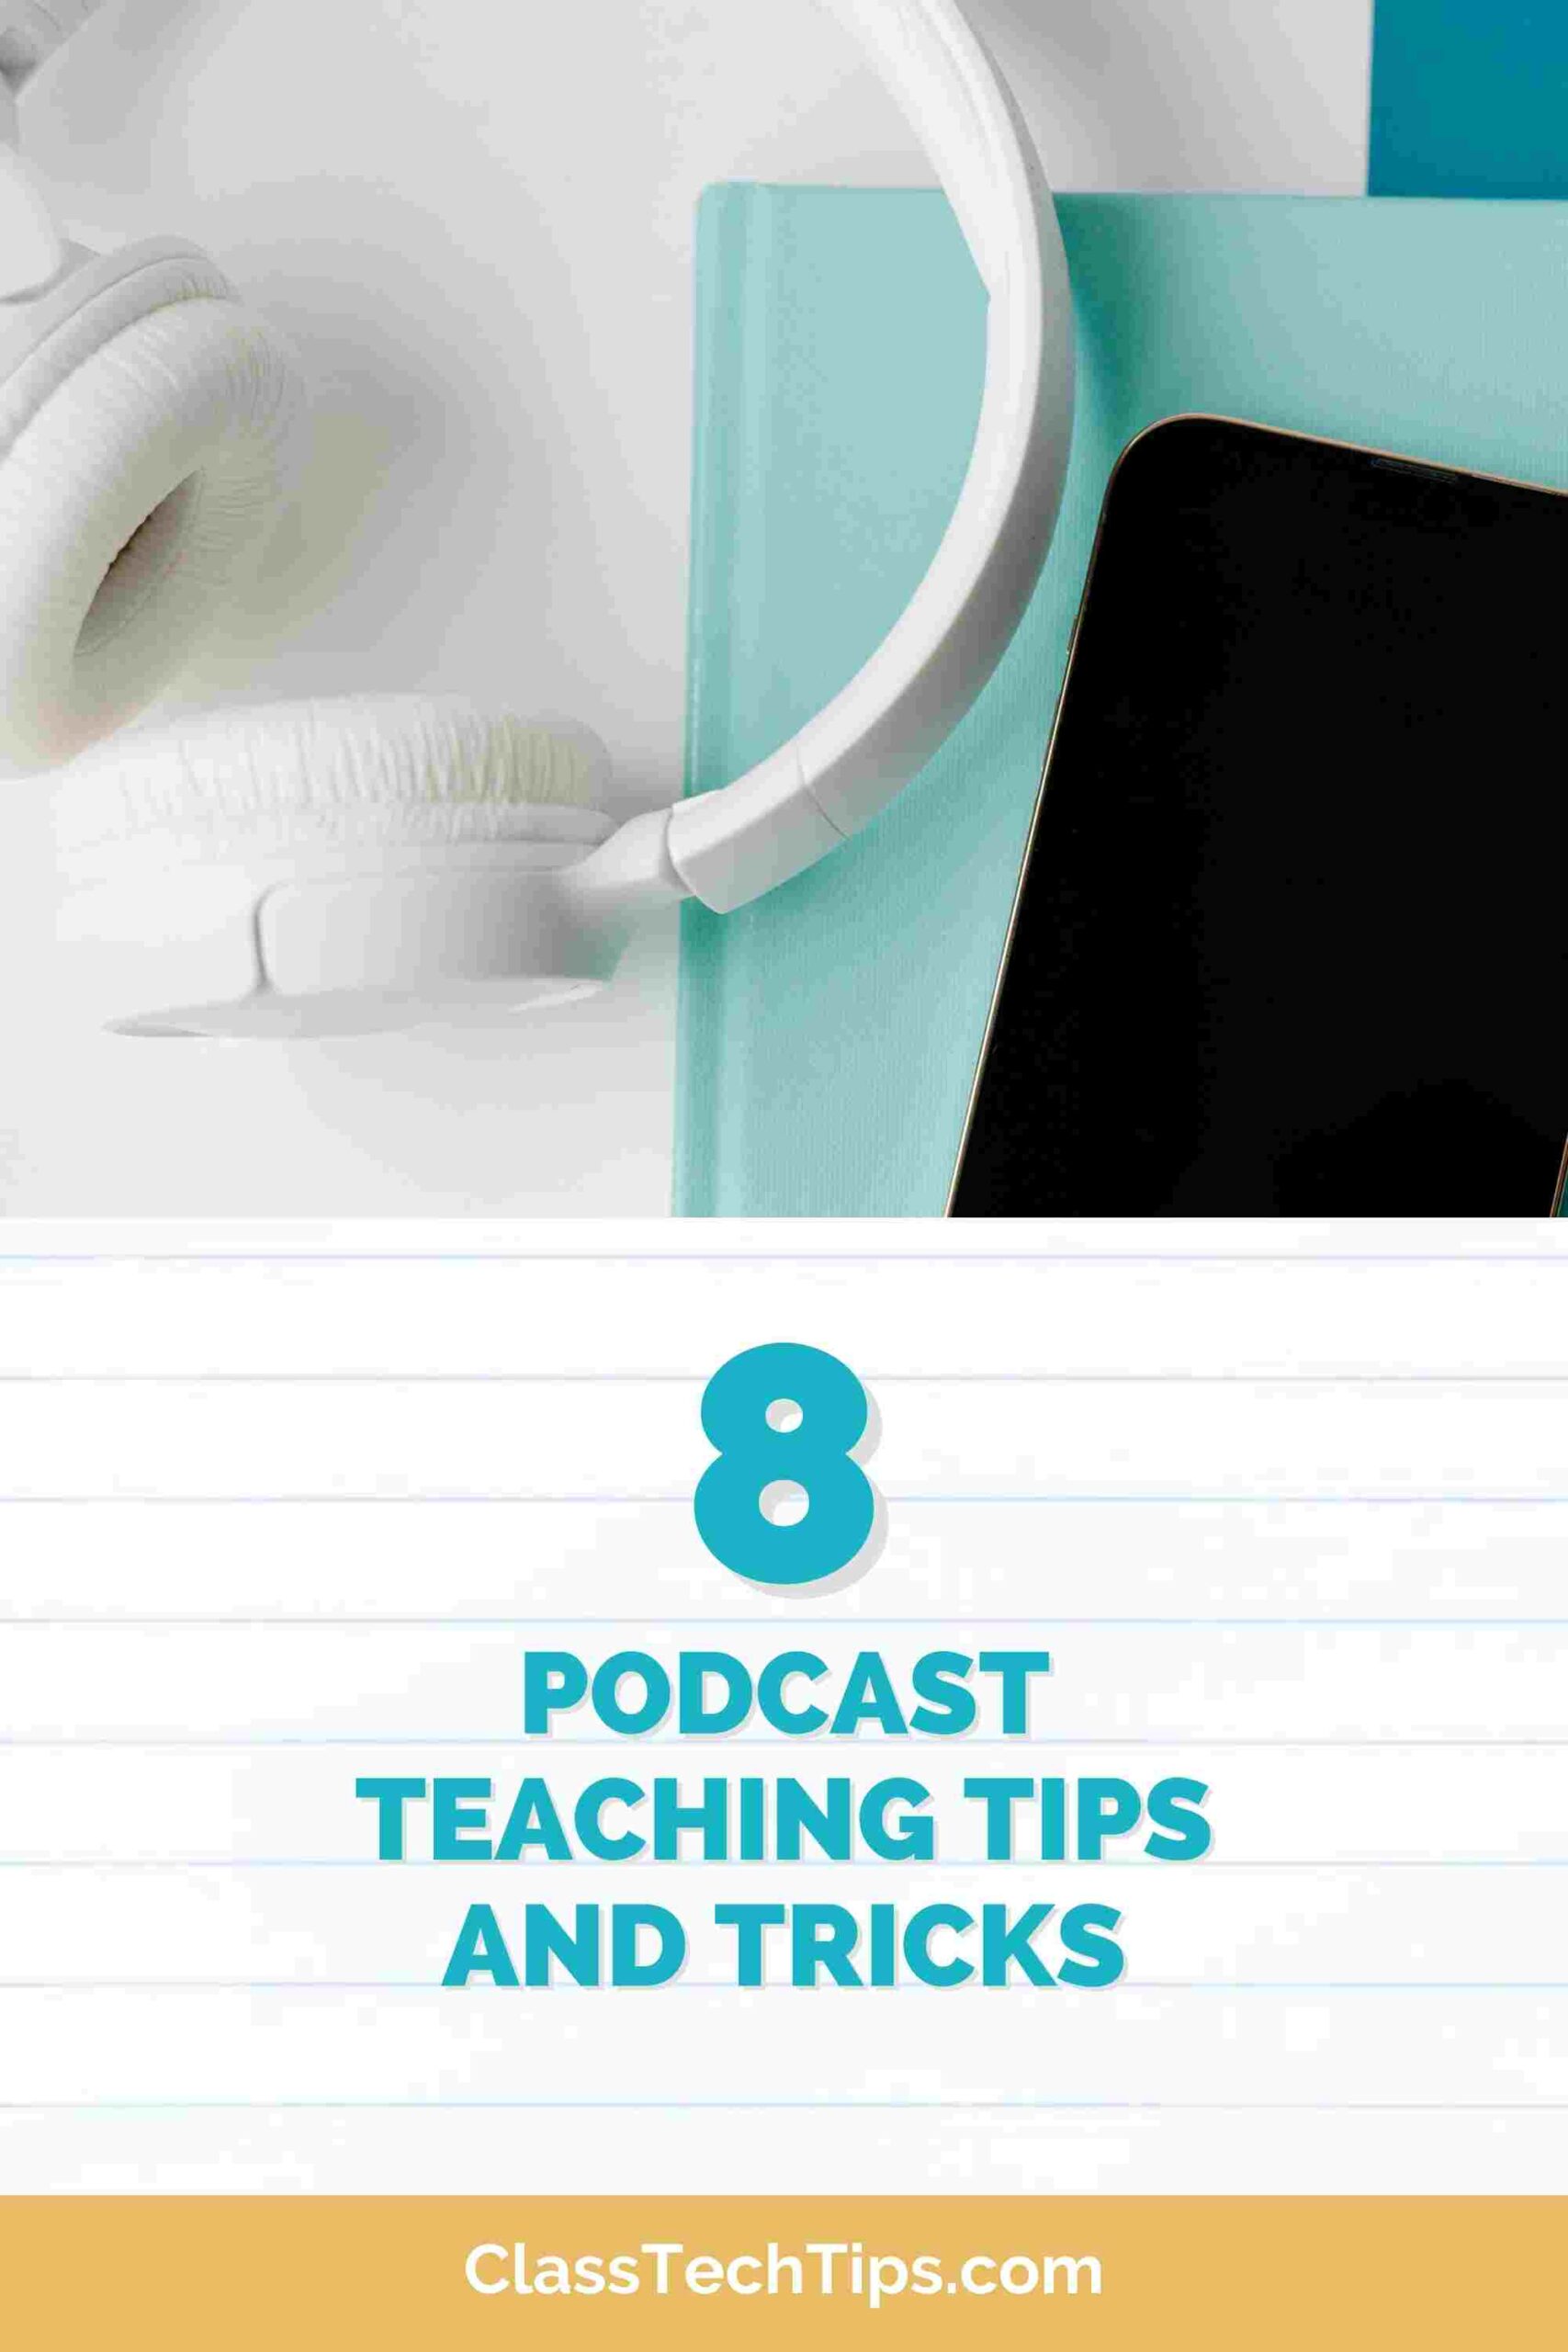 Podcast Teaching Tips and Tricks